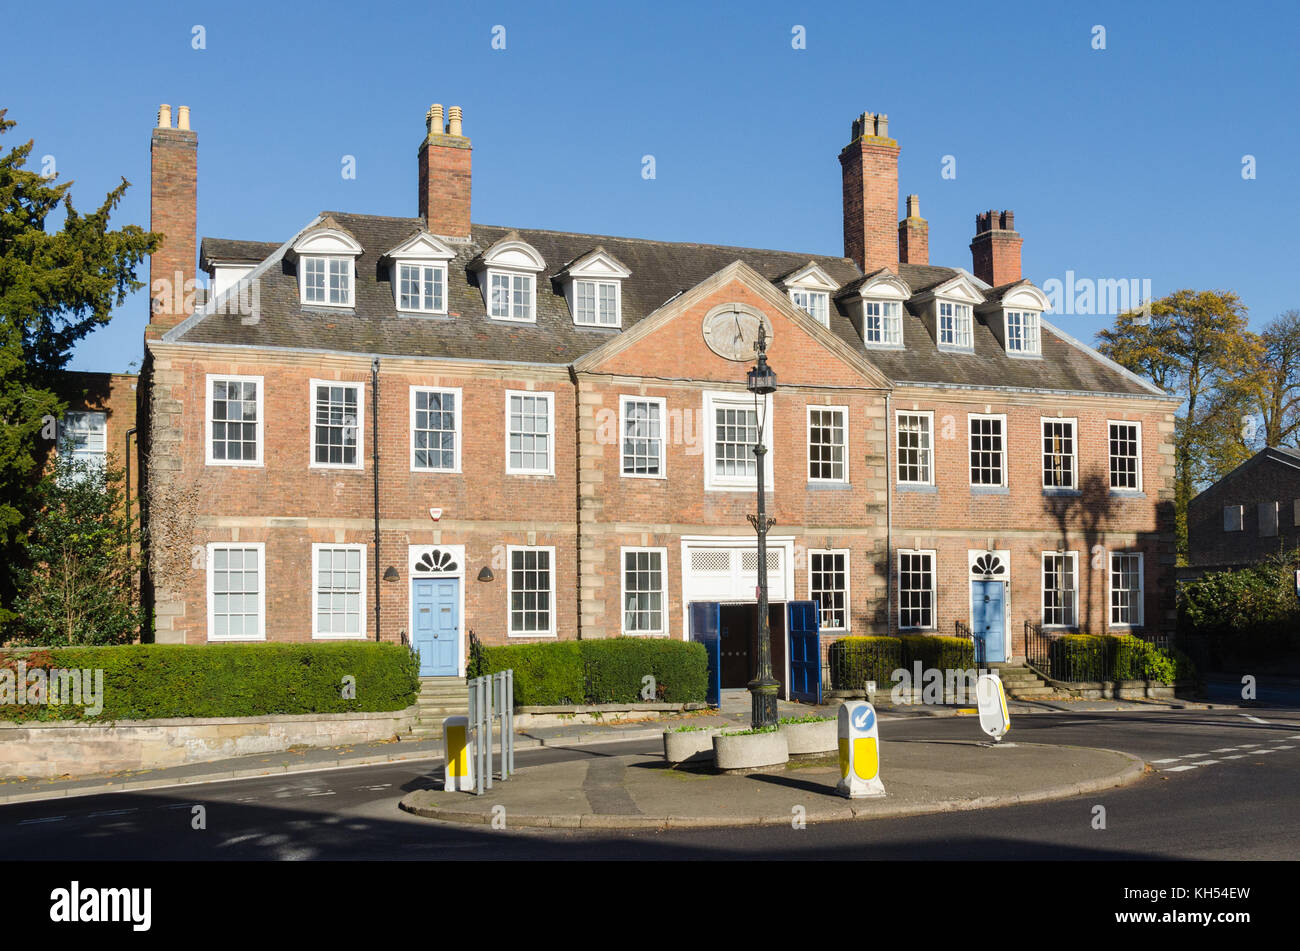 Northgate House Conference Centre in Northgate, Warwick, Warwickshire, UK Stock Photo